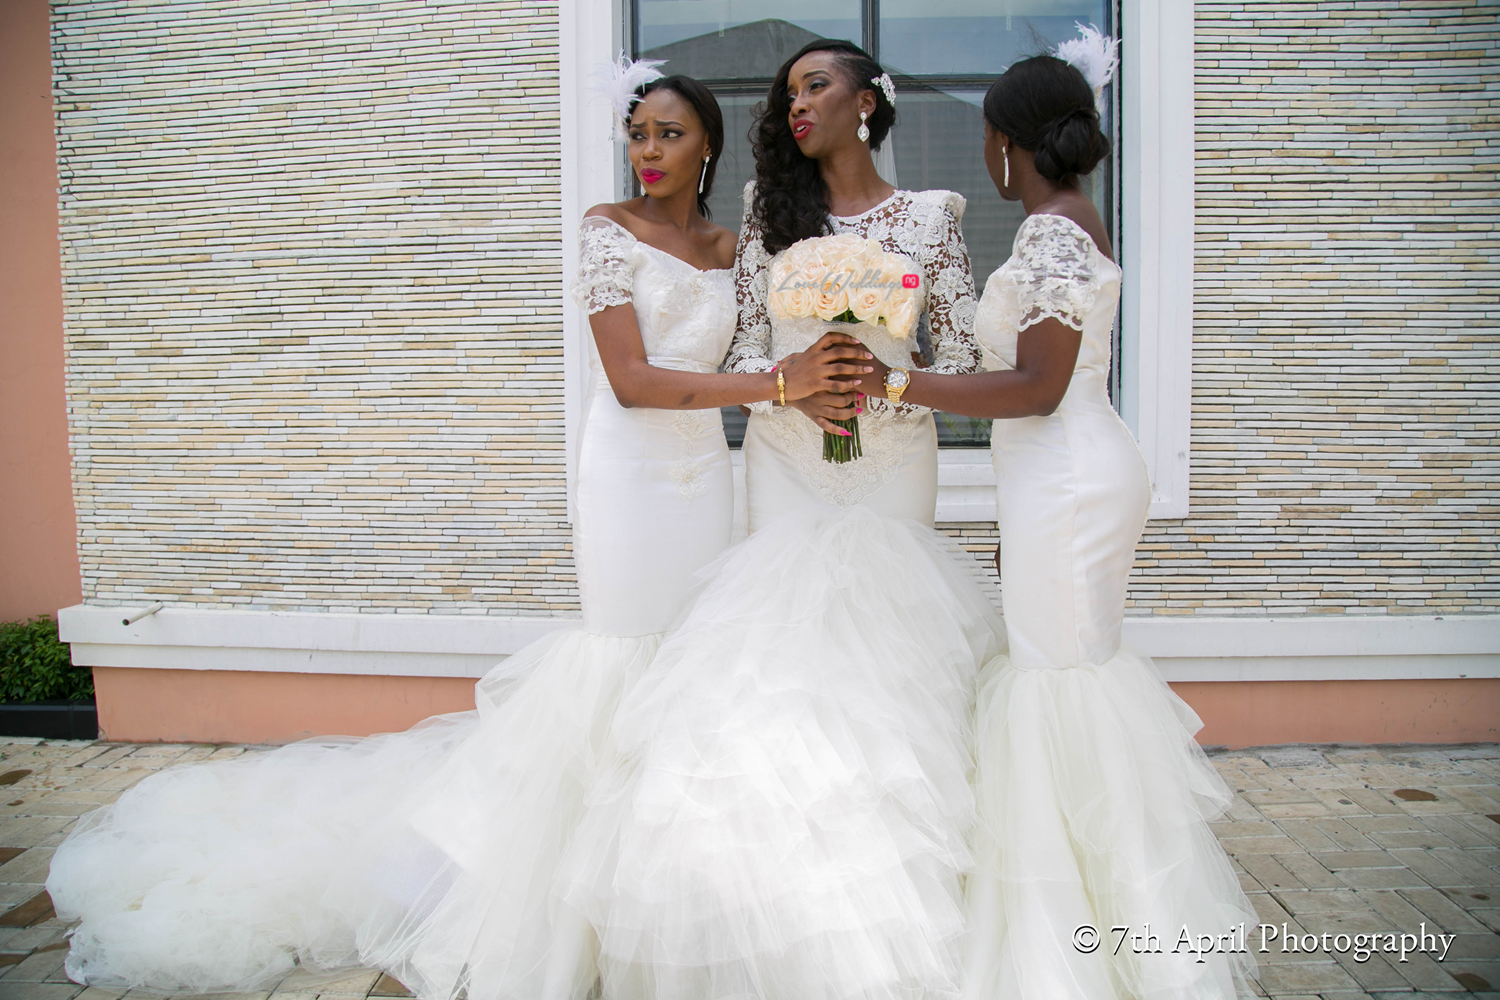 LoveweddingsNG Yvonne and Ivan 7th April Photography49